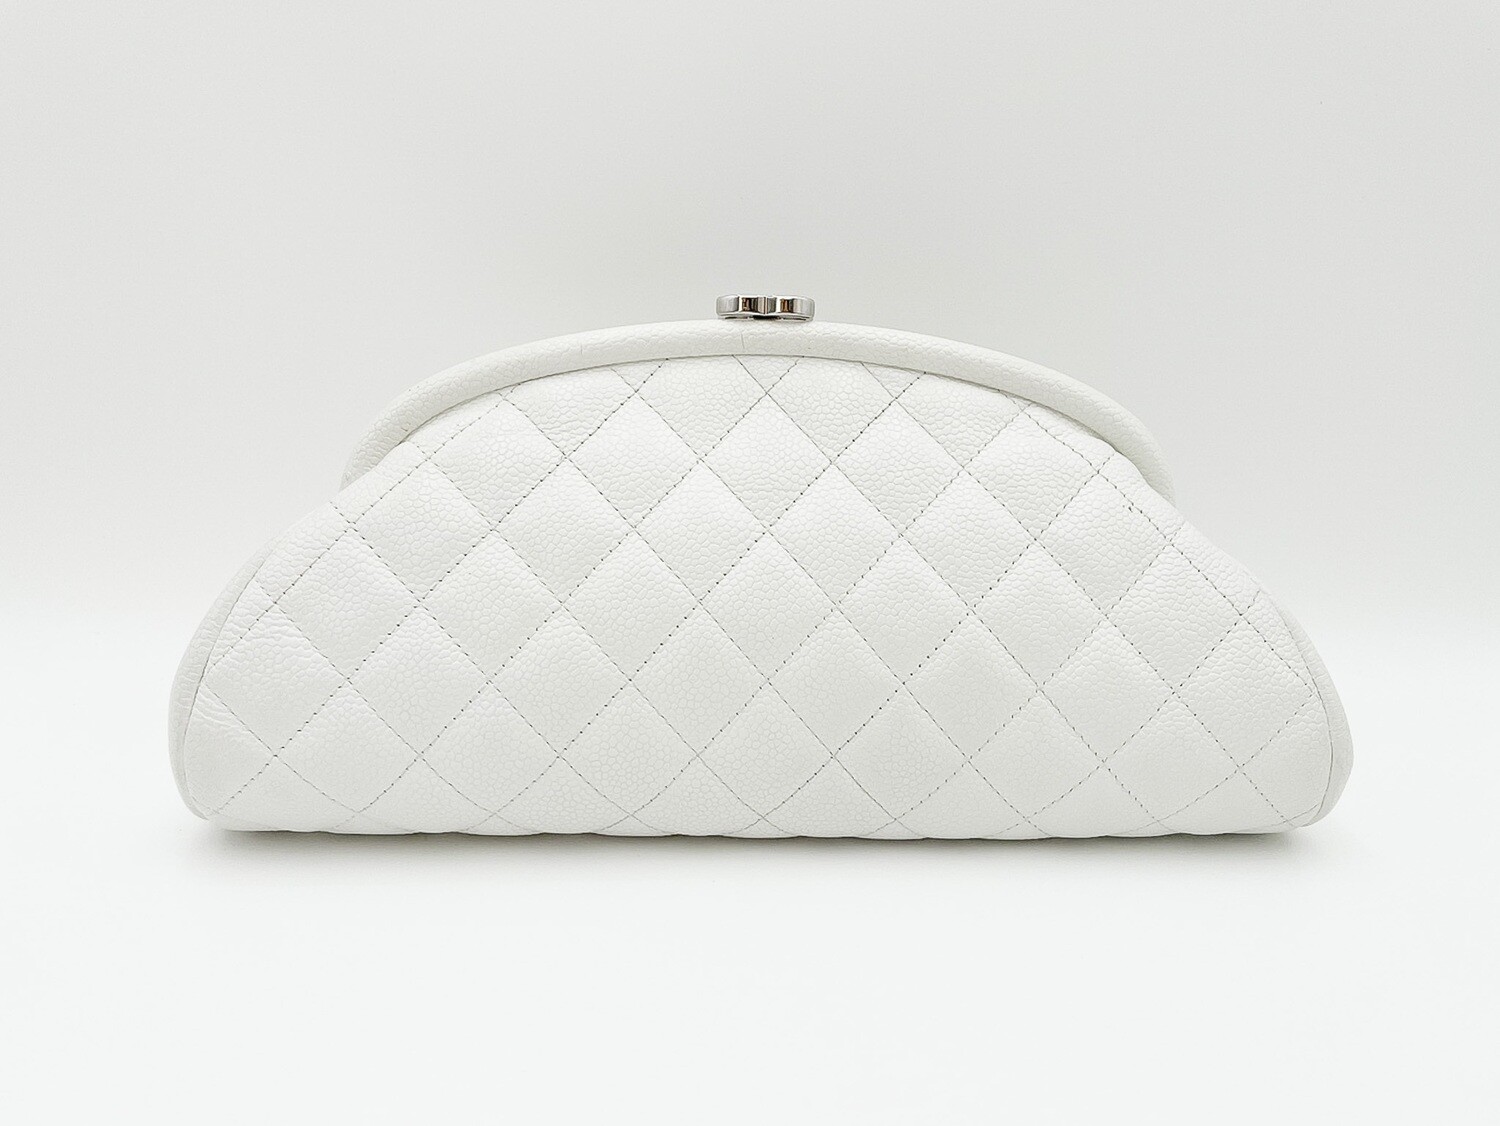 clutch chanel timeless